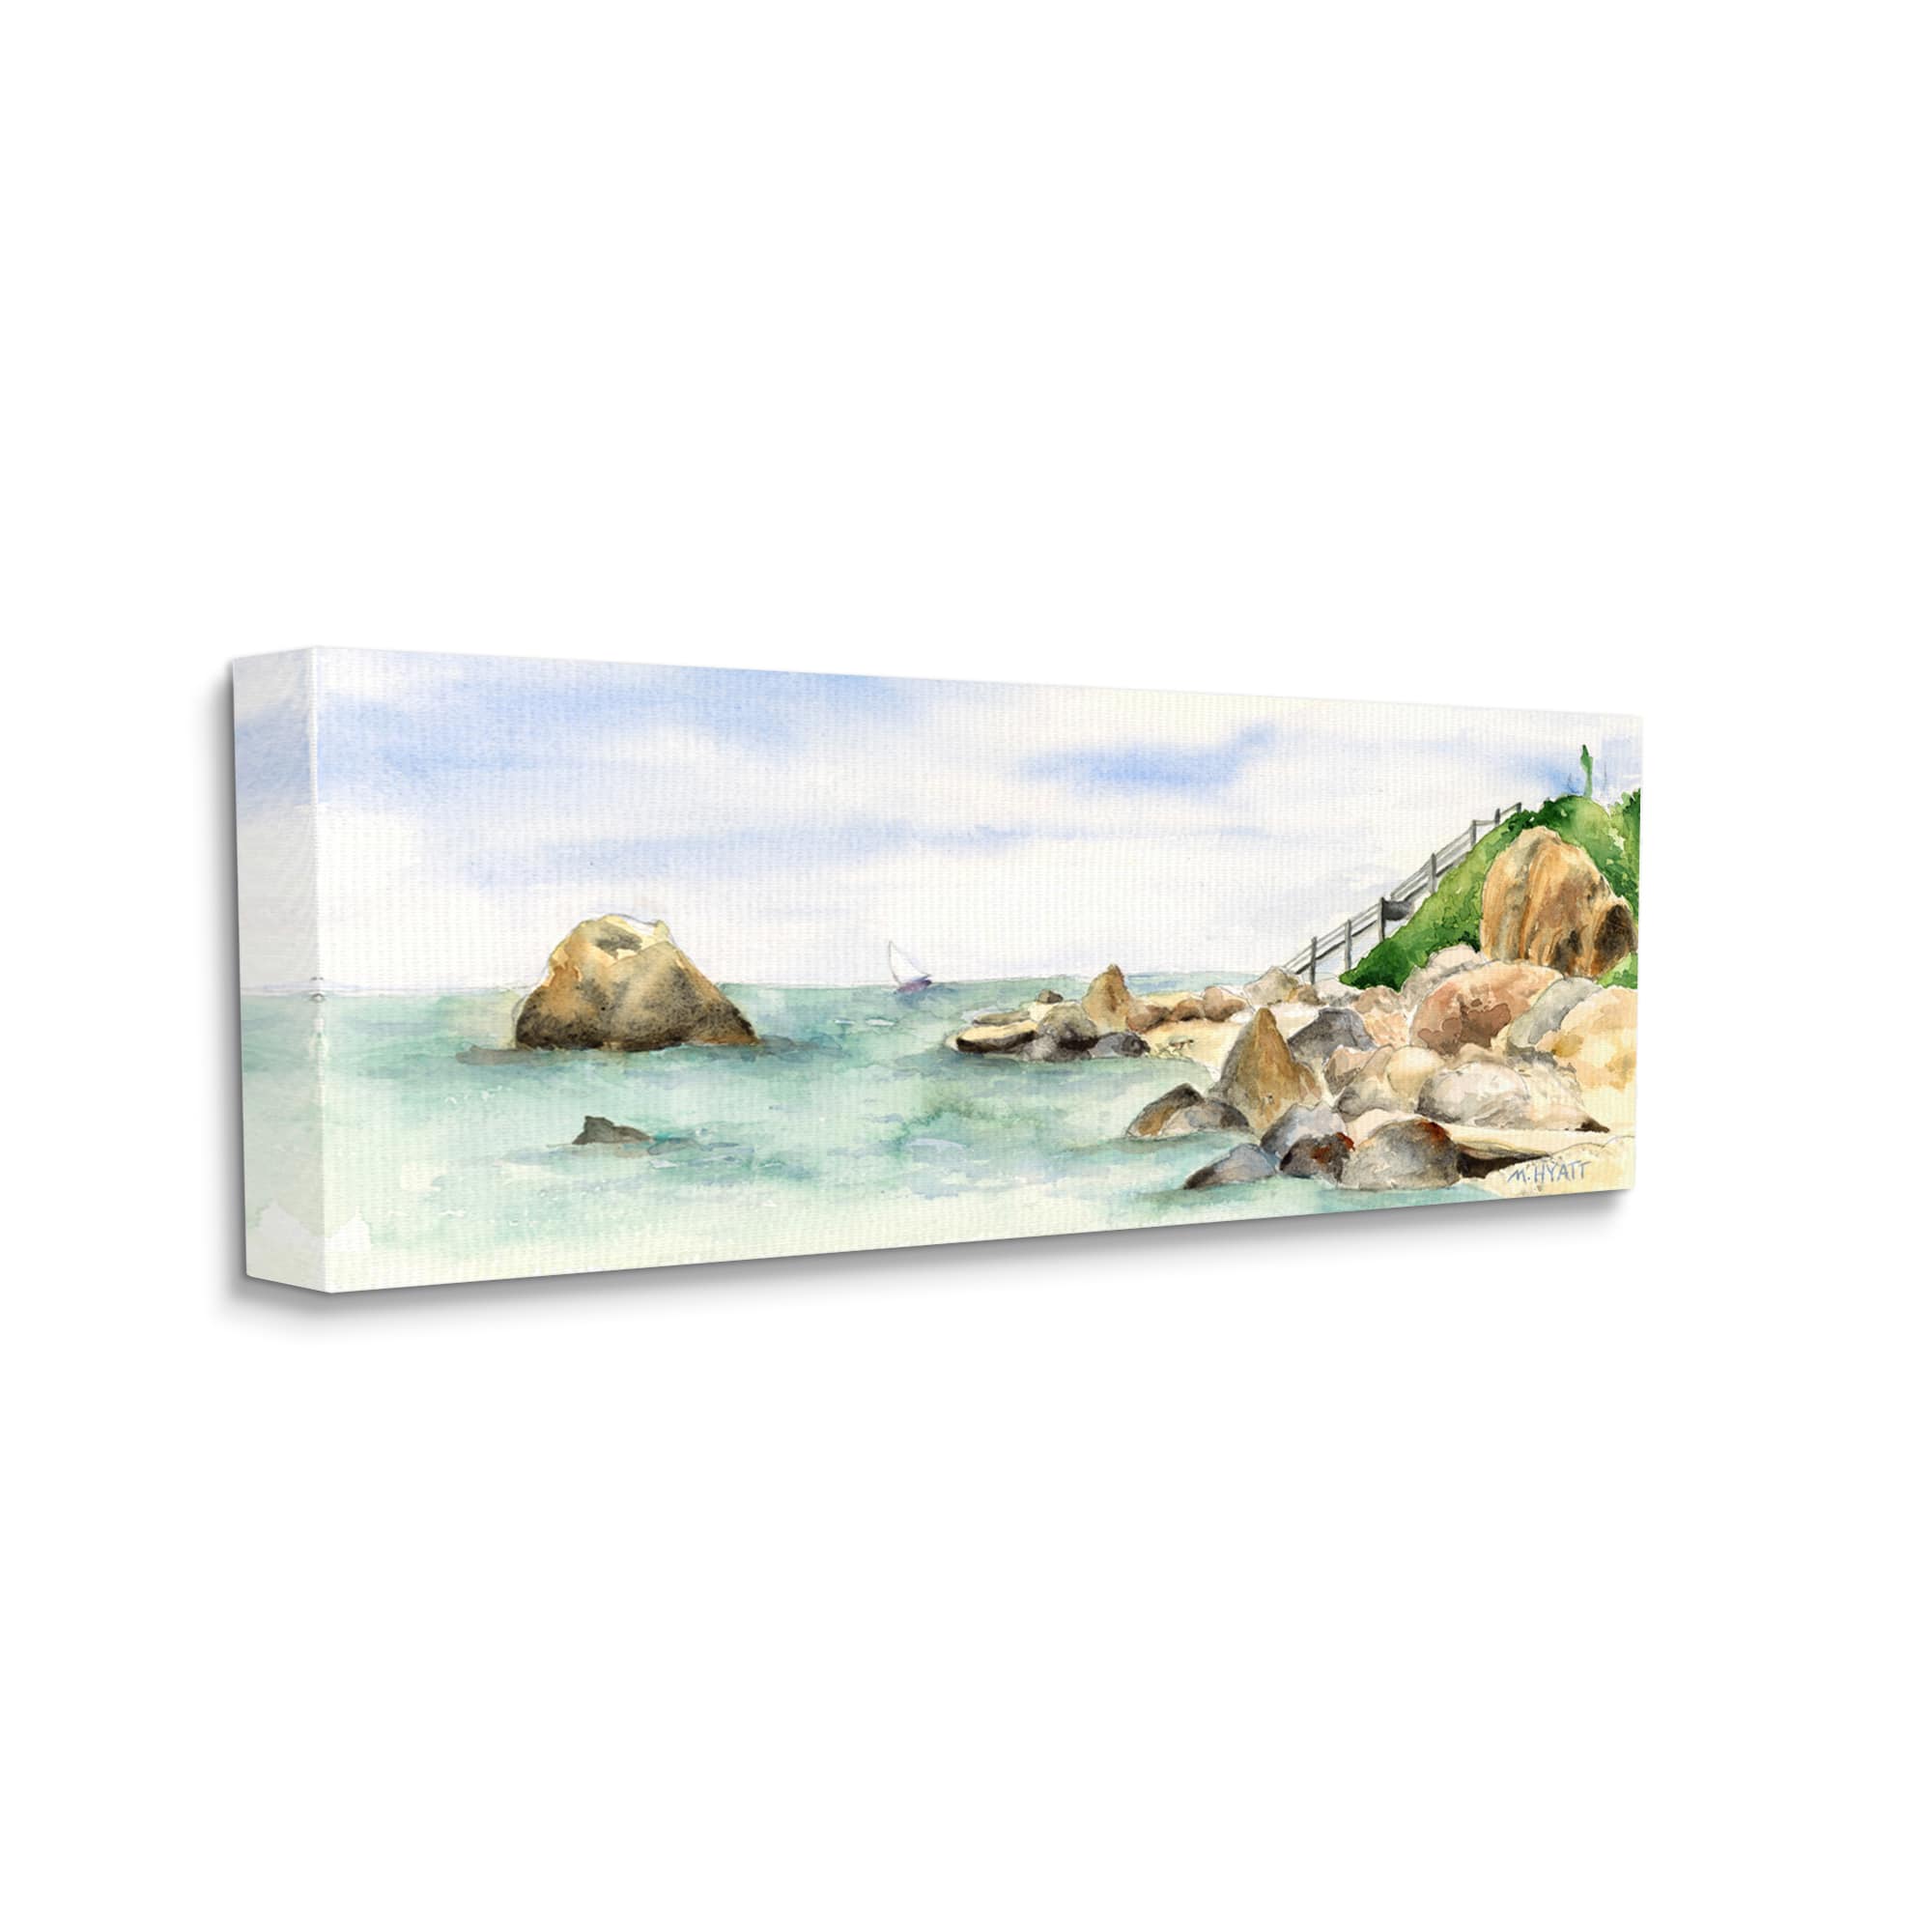 Stupell Industries Rocky Point Coastal Seascape Wall Accent